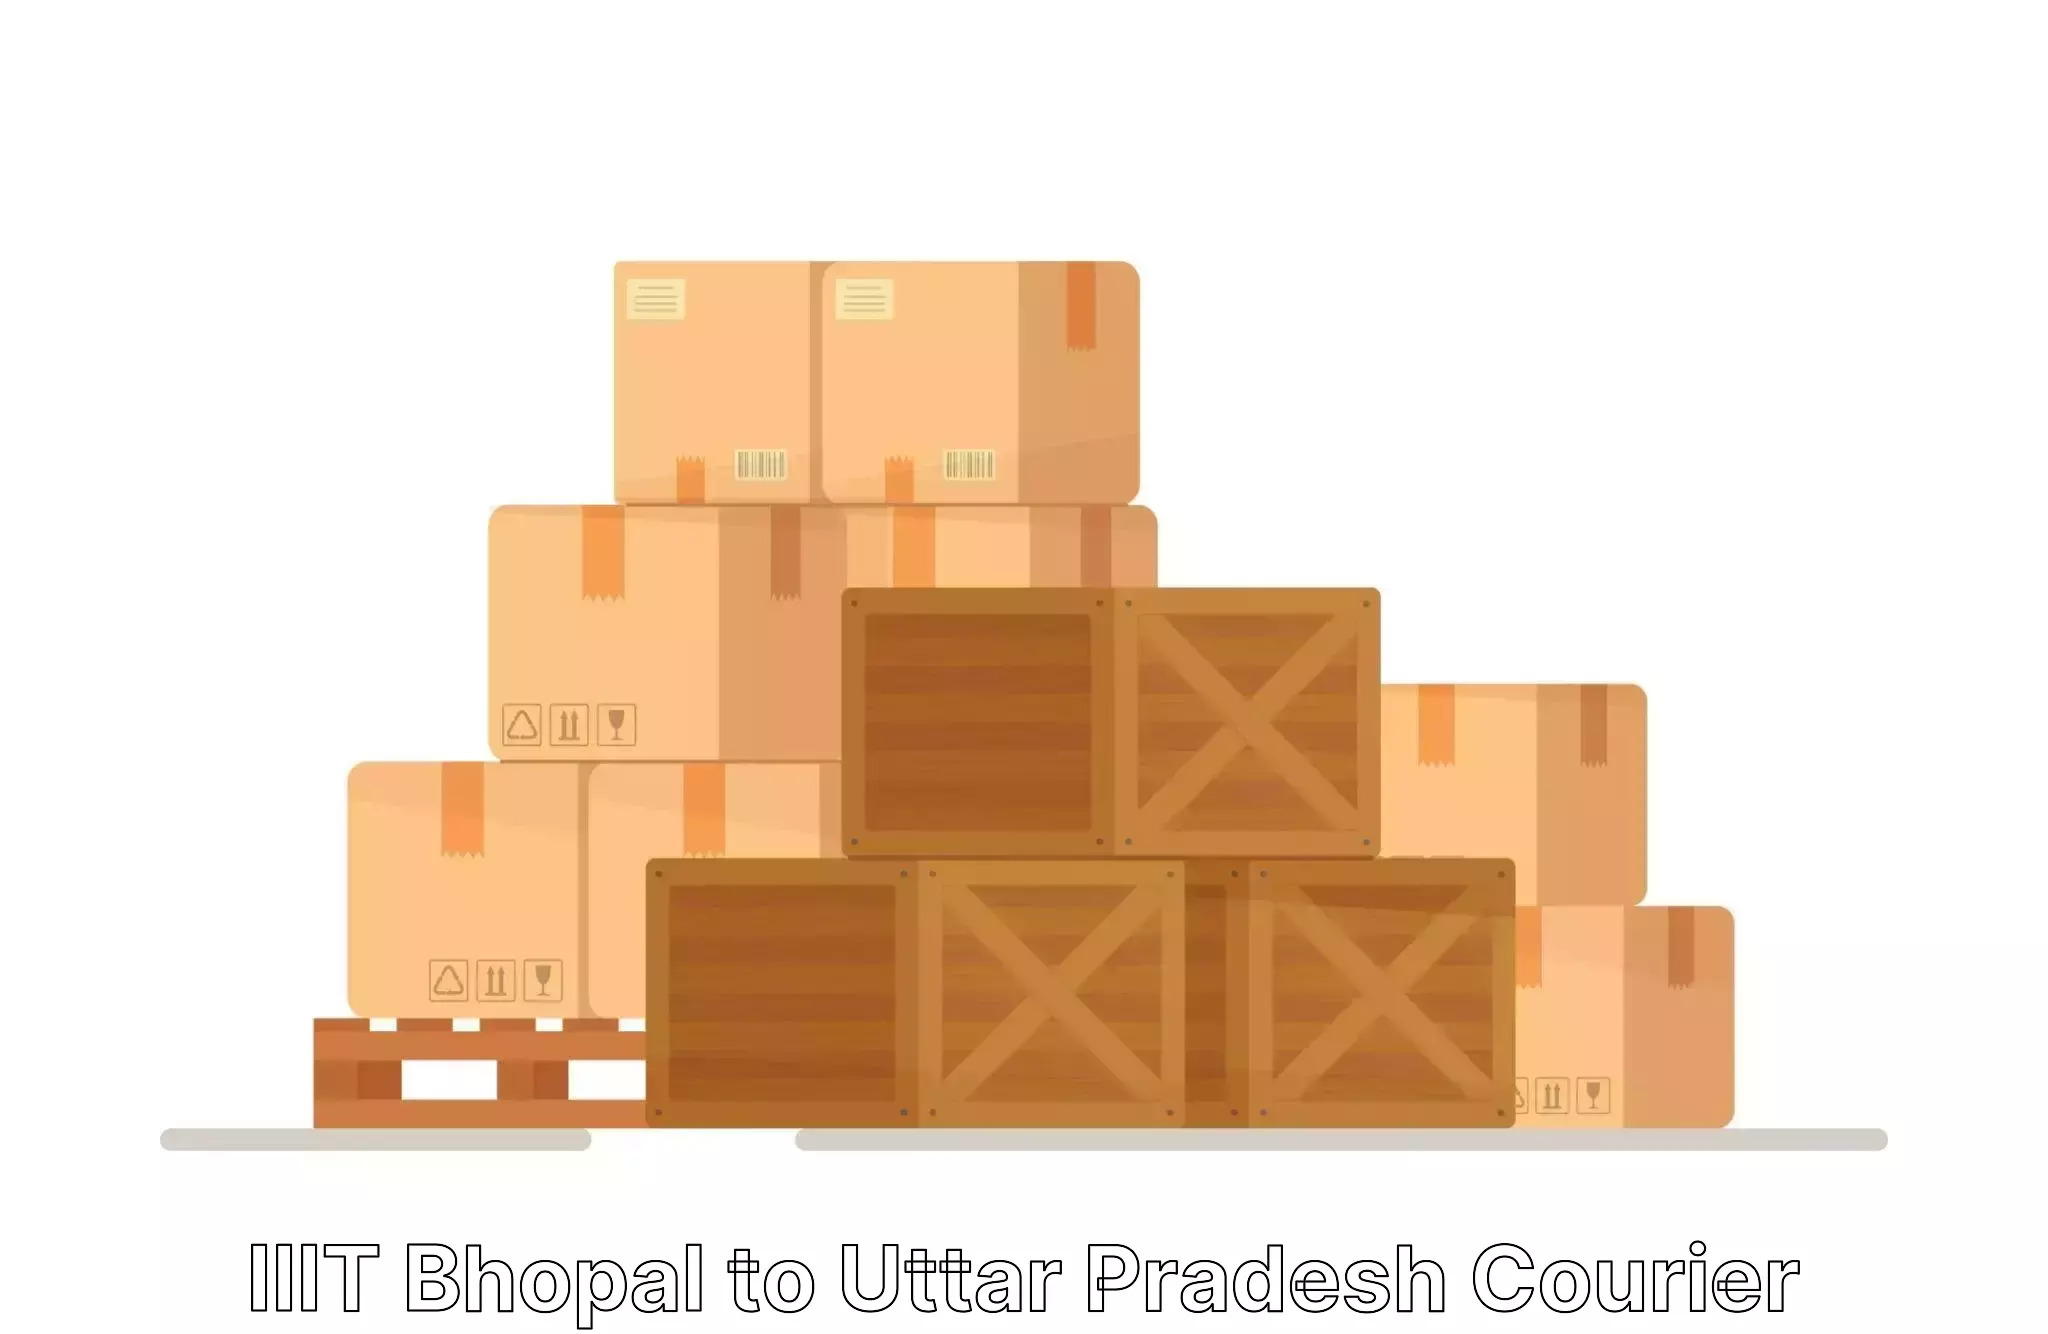 Trusted household movers in IIIT Bhopal to King Georges Medical University Lucknow